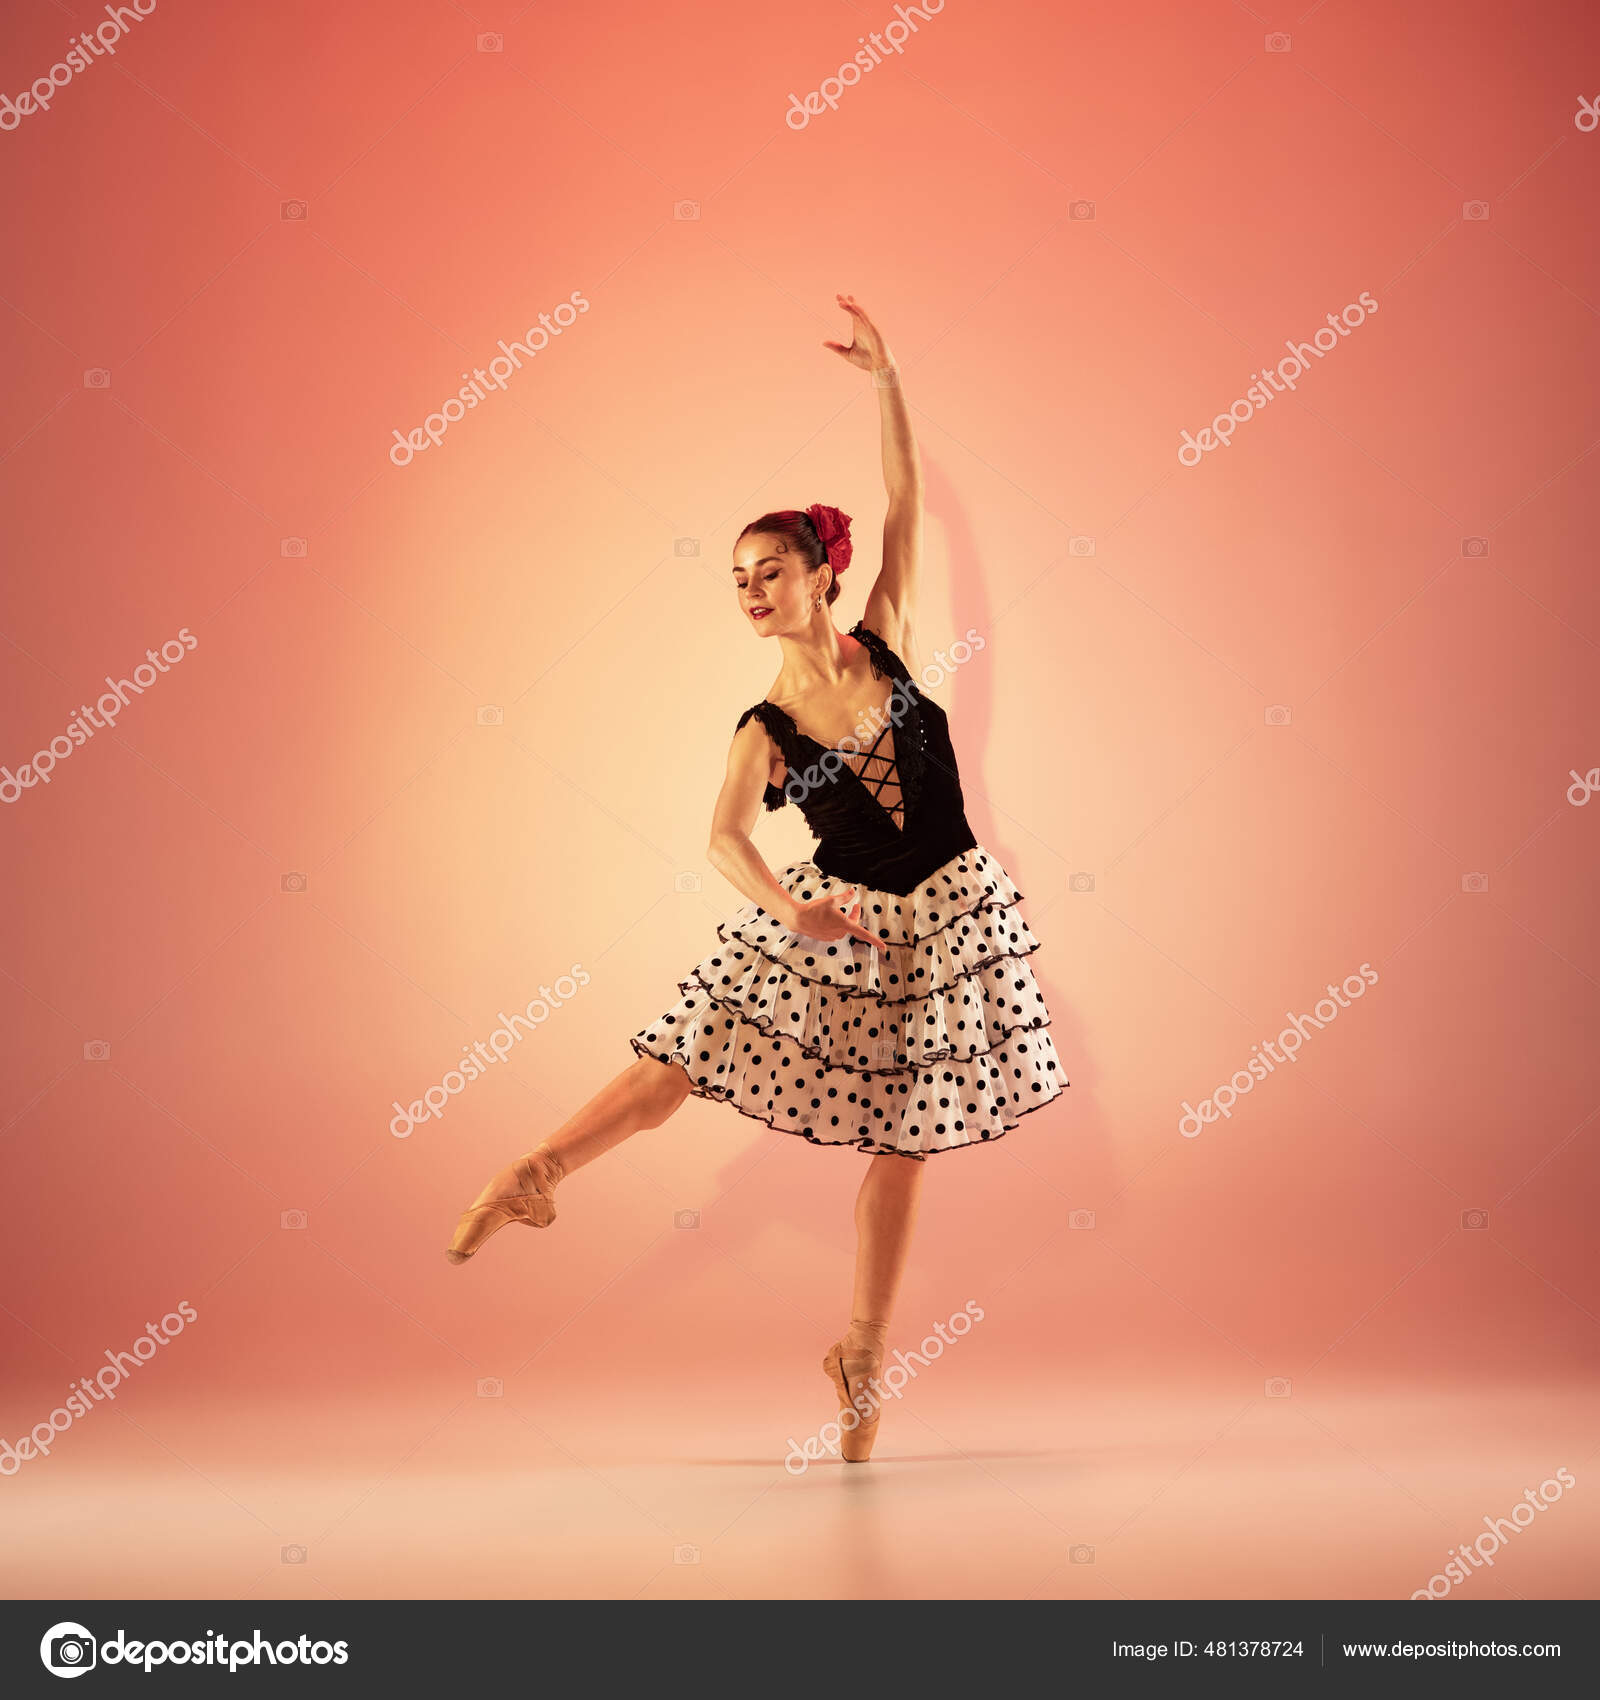 and incredibly ballerina is posing and dancing at red studio full of light. Stock Photo by ©vova130555@gmail.com